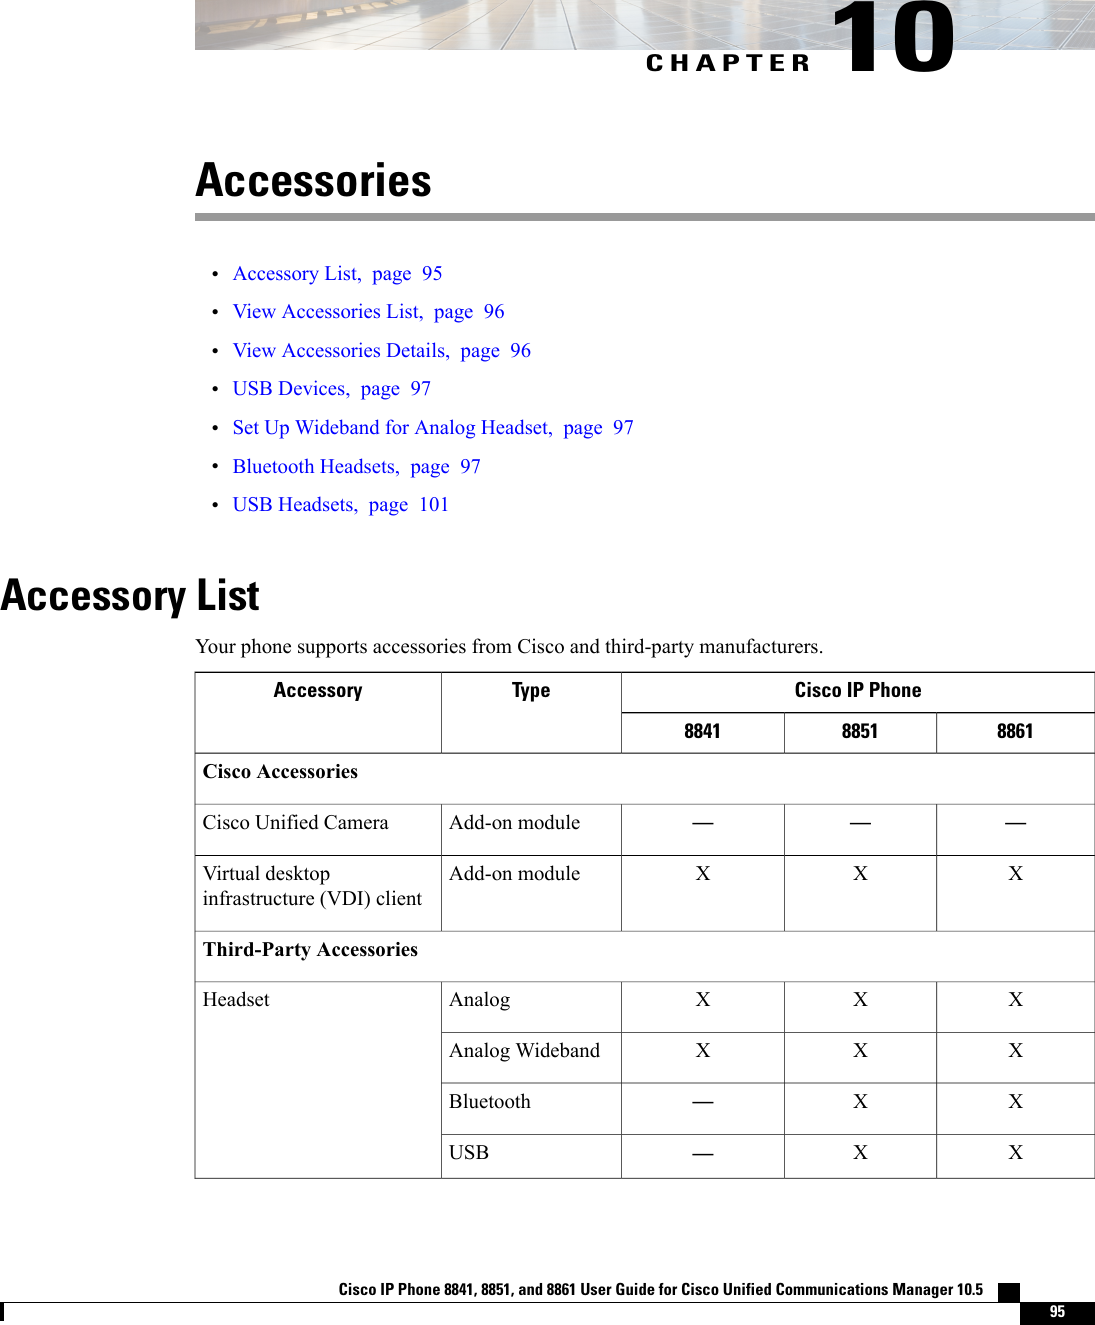 CHAPTER 10Accessories•Accessory List, page 95•View Accessories List, page 96•View Accessories Details, page 96•USB Devices, page 97•Set Up Wideband for Analog Headset, page 97•Bluetooth Headsets, page 97•USB Headsets, page 101Accessory ListYour phone supports accessories from Cisco and third-party manufacturers.Cisco IP PhoneTypeAccessory886188518841Cisco Accessories———Add-on moduleCisco Unified CameraXXXAdd-on moduleVirtual desktopinfrastructure (VDI) clientThird-Party AccessoriesXXXAnalogHeadsetXXXAnalog WidebandXX—BluetoothXX—USBCisco IP Phone 8841, 8851, and 8861 User Guide for Cisco Unified Communications Manager 10.5    95